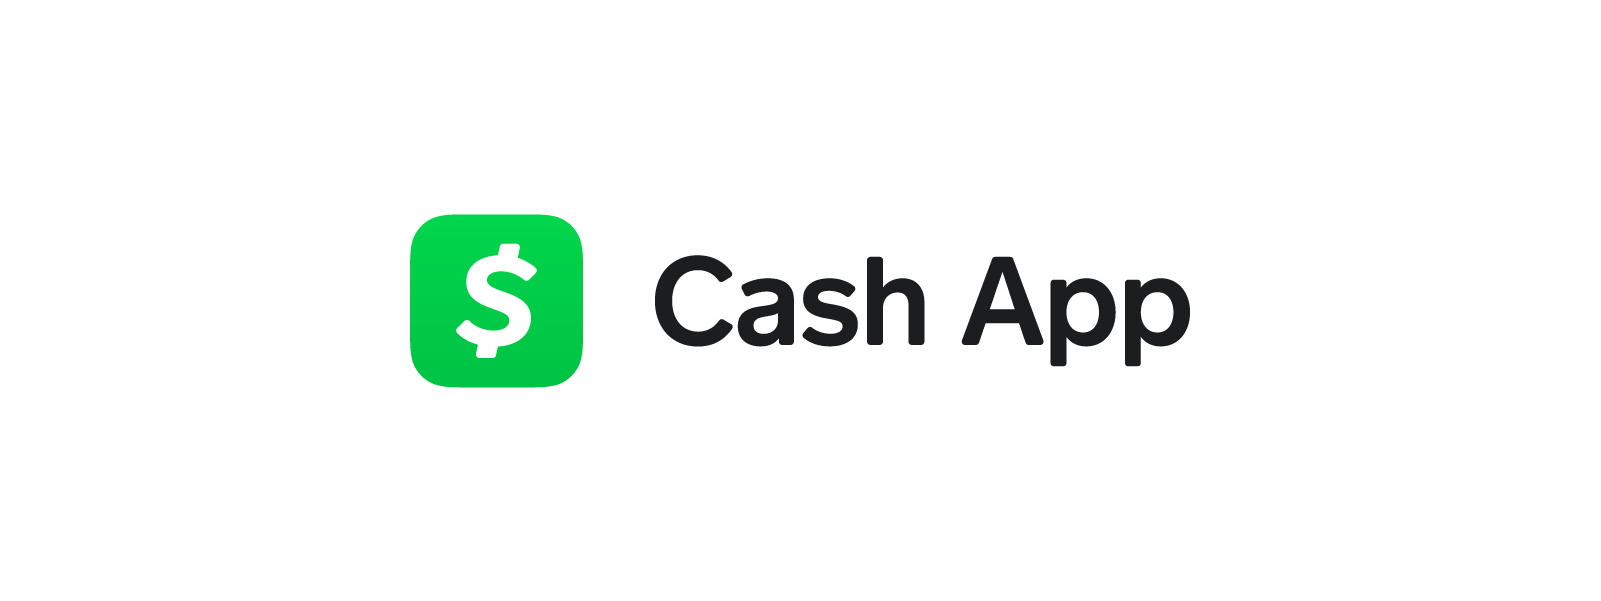 Cash App Investing 2021 Review Should You Open An Account The Ascent By Motley Fool